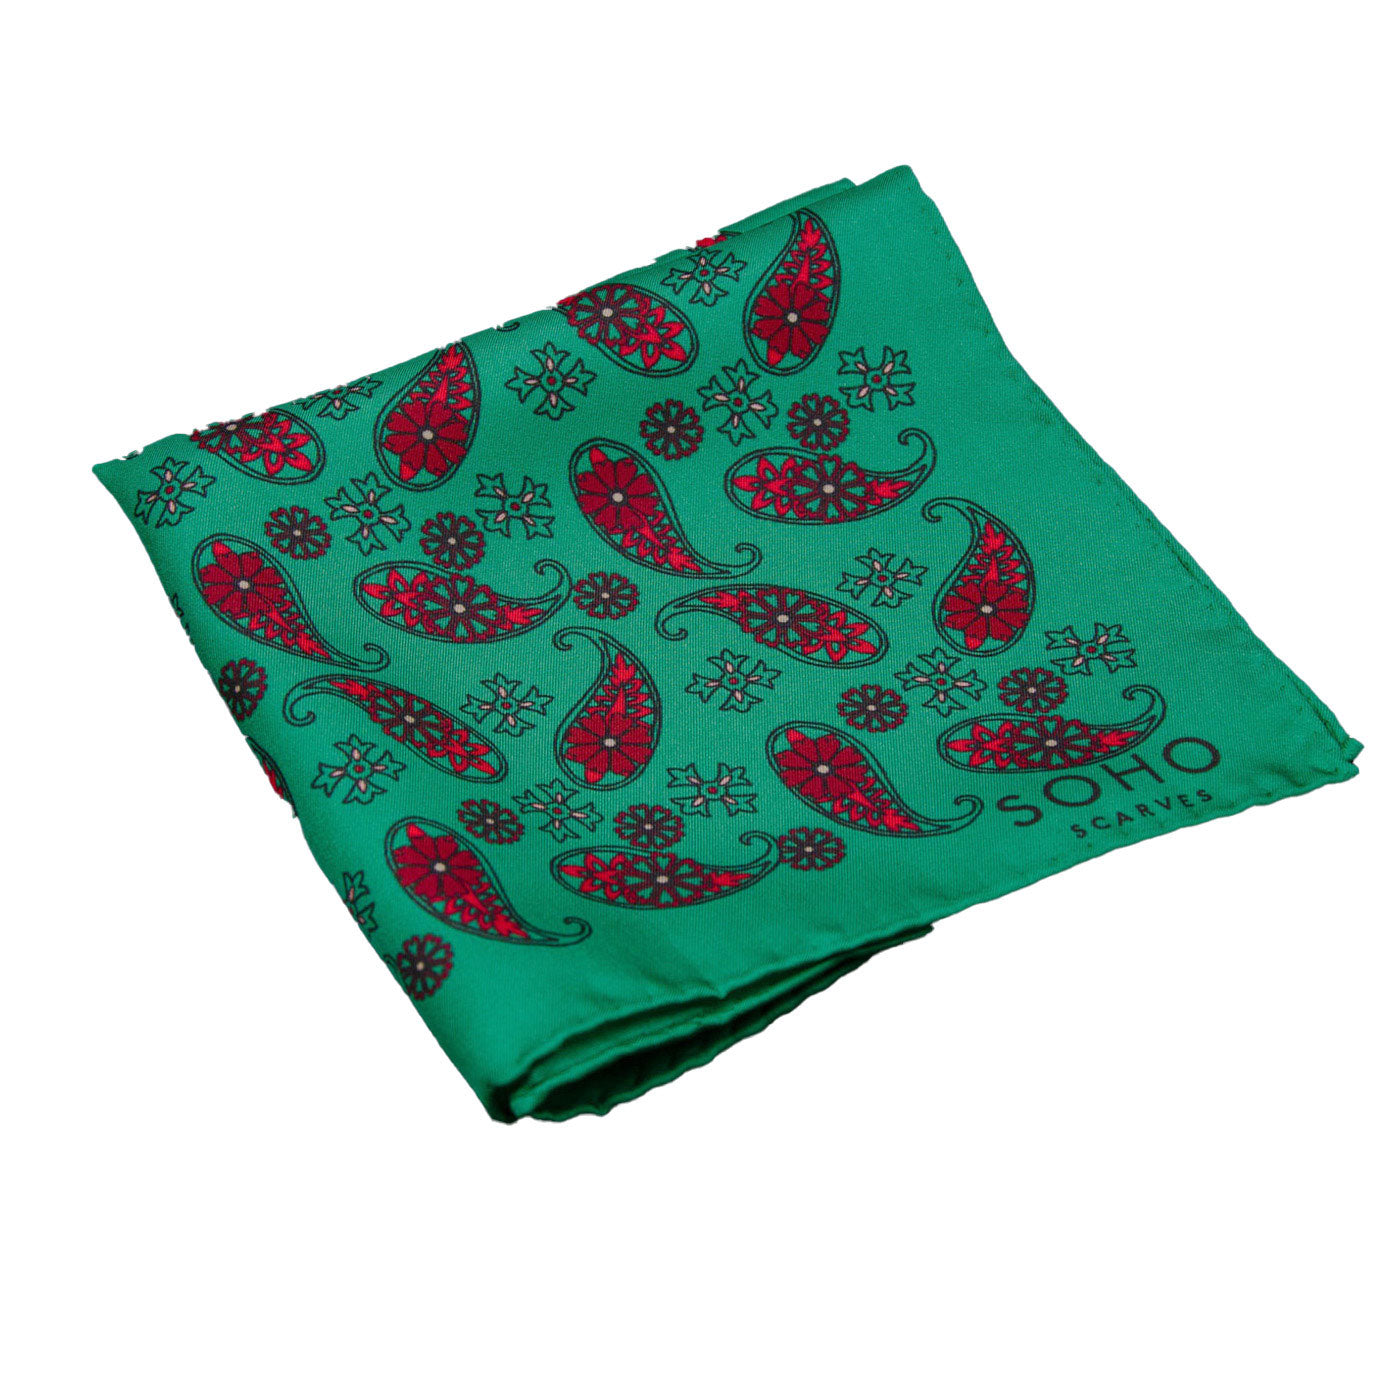 A closer view of silk 'Fes' pocket square folded showing simple red paisley 'tears' on a green ground. Pocket square placed on a white background.